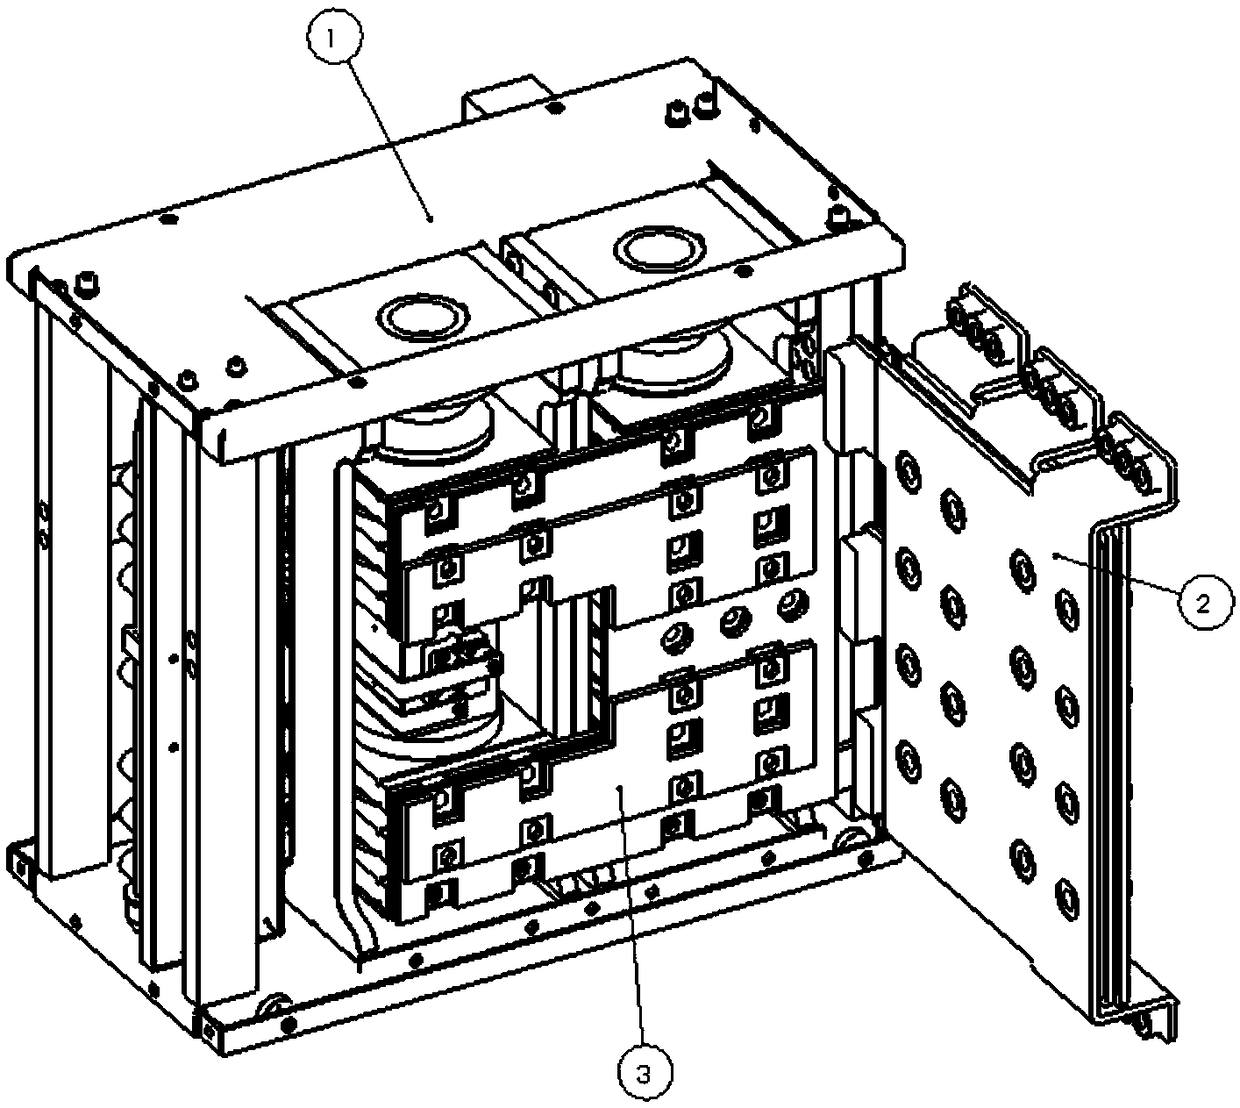 A power unit module of a frequency converter with an open frame structure